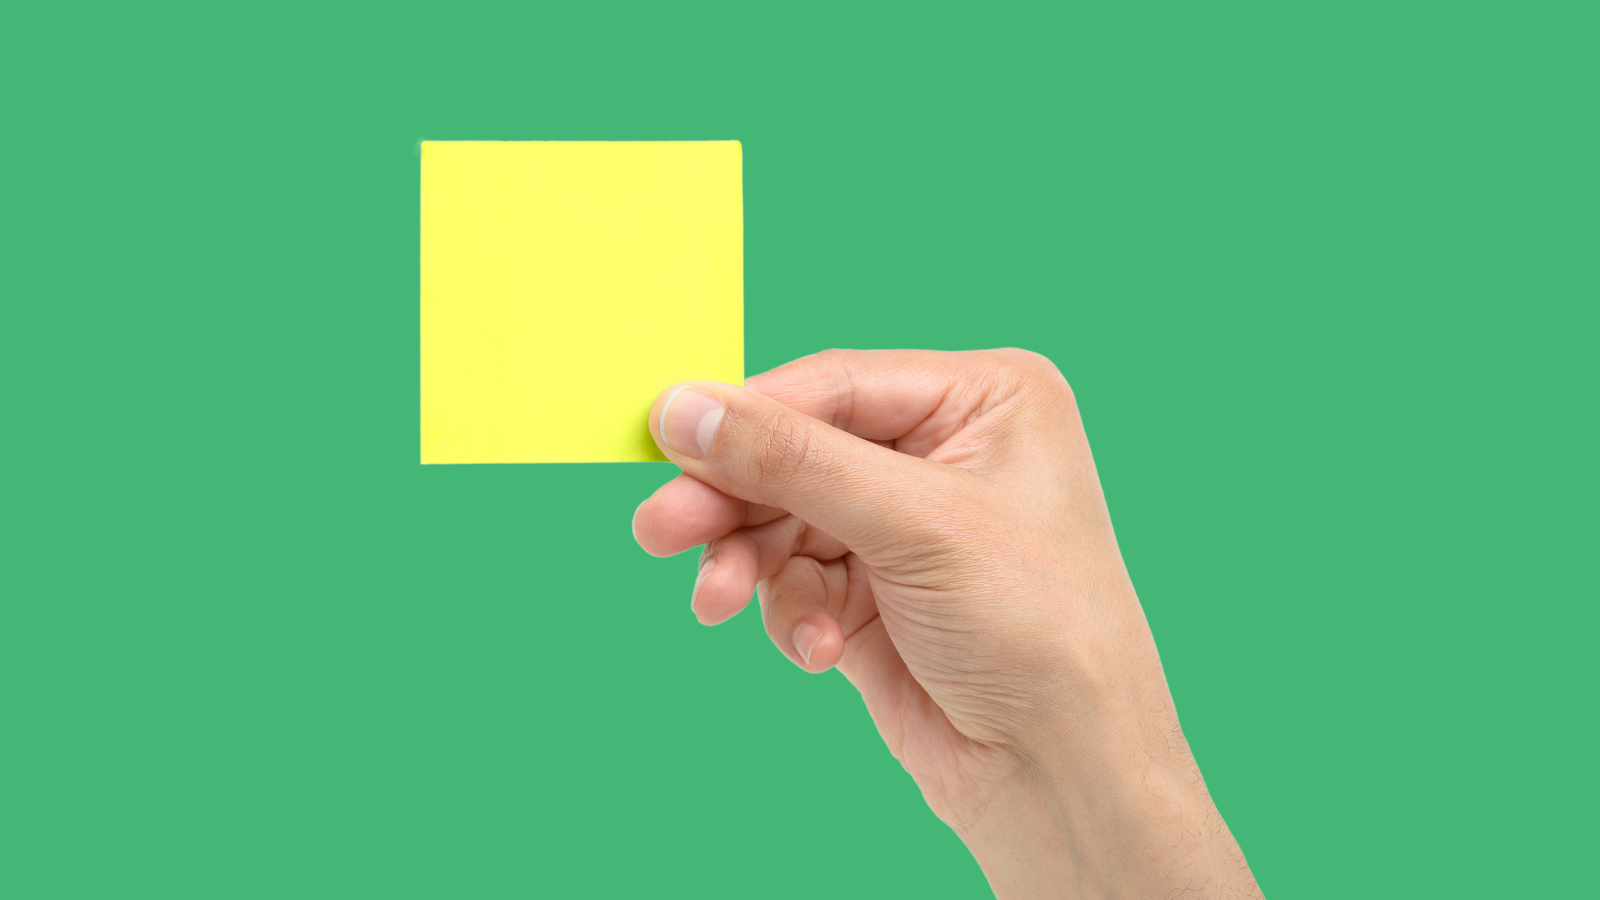 How This Teacher Uses a Yellow Card for Classroom Management 1